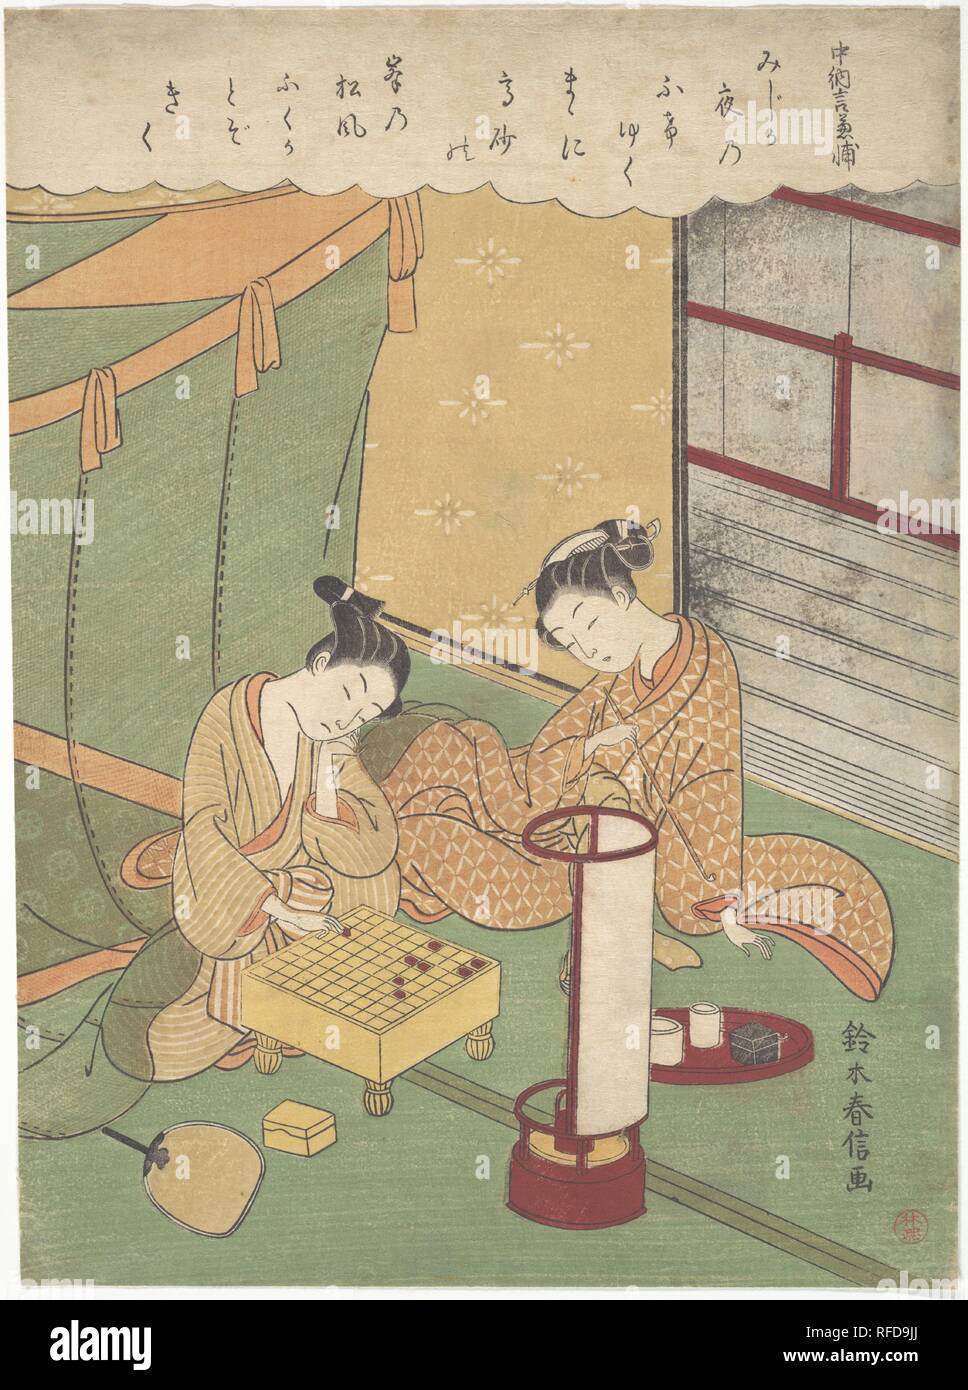 A Young Woman and Man Playing Shogi (Japanese Chess); Chunagon Kanesuke, from a series alluding to the Thirty-Six Poetic Immortals (Sanjurokkasen). Artist: Suzuki Harunobu (Japanese, 1725-1770). Culture: Japan. Dimensions: 11 1/8 x 8 1/8 in. (28.3 x 20.6 cm). Date: ca. 1767-69.  A young woman watches her male companion make the final moves in a game of shogi (Japanese chess) next to an andon floor lamp signaling nighttime and a fan indicating summer. The series to which this print belongs links classical poems by thirty-six of the most famous poets of ancient and medieval times with up-to-date Stock Photo